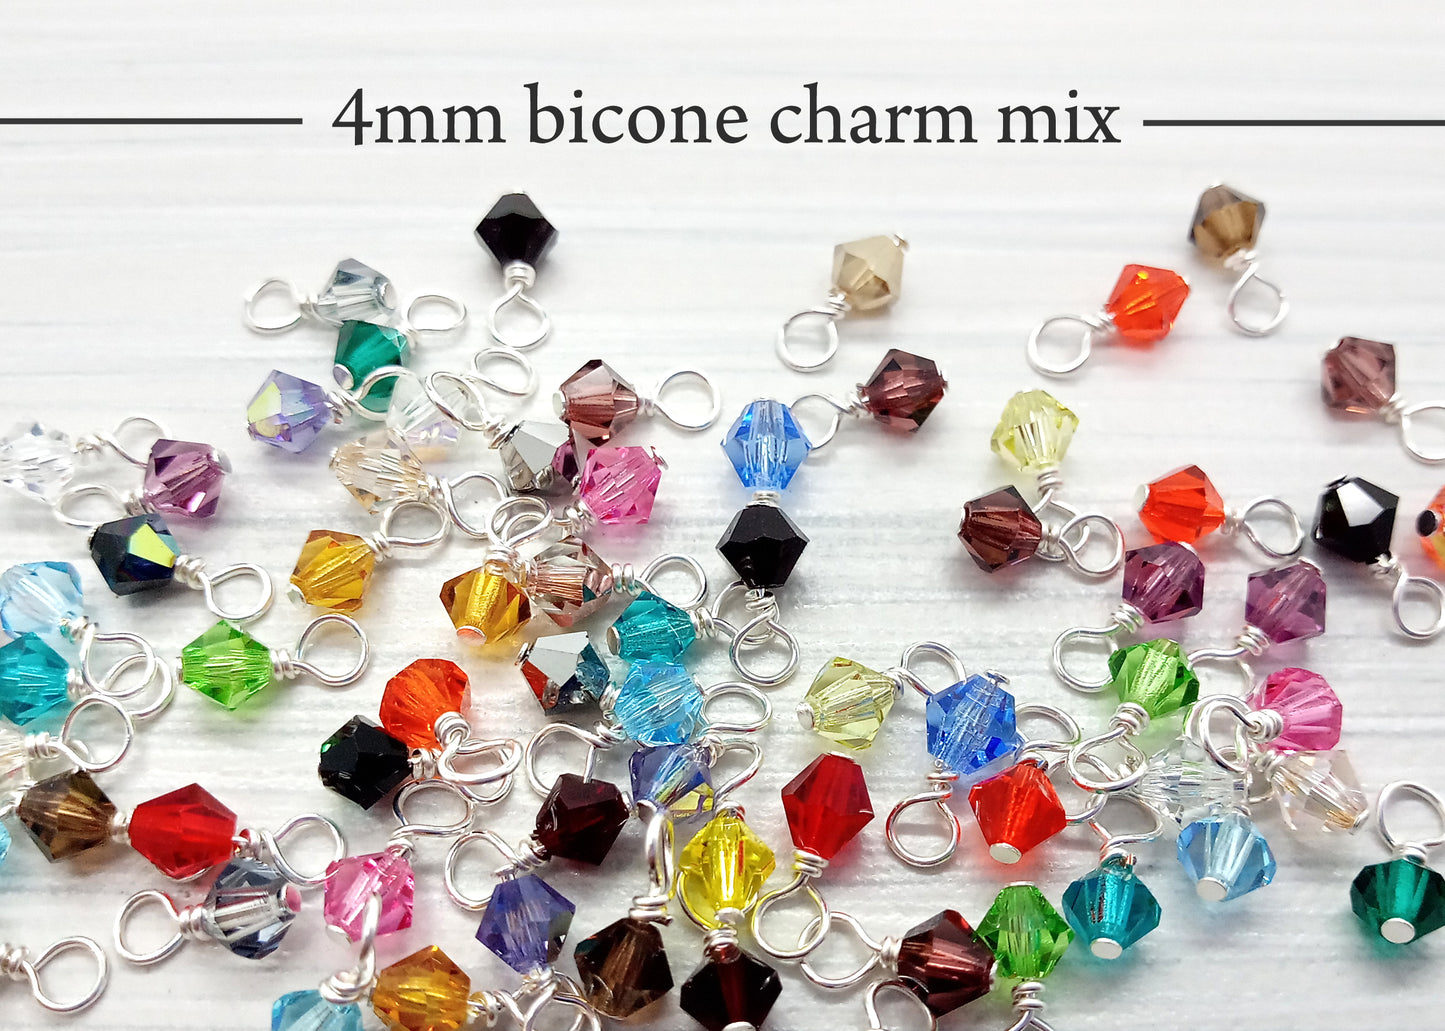 Bulk Crystal Bicone Bead Charms, 500 pc Mixed Colors in 4mm 5mm and 6mm - Adorabilities Charms & Trinkets